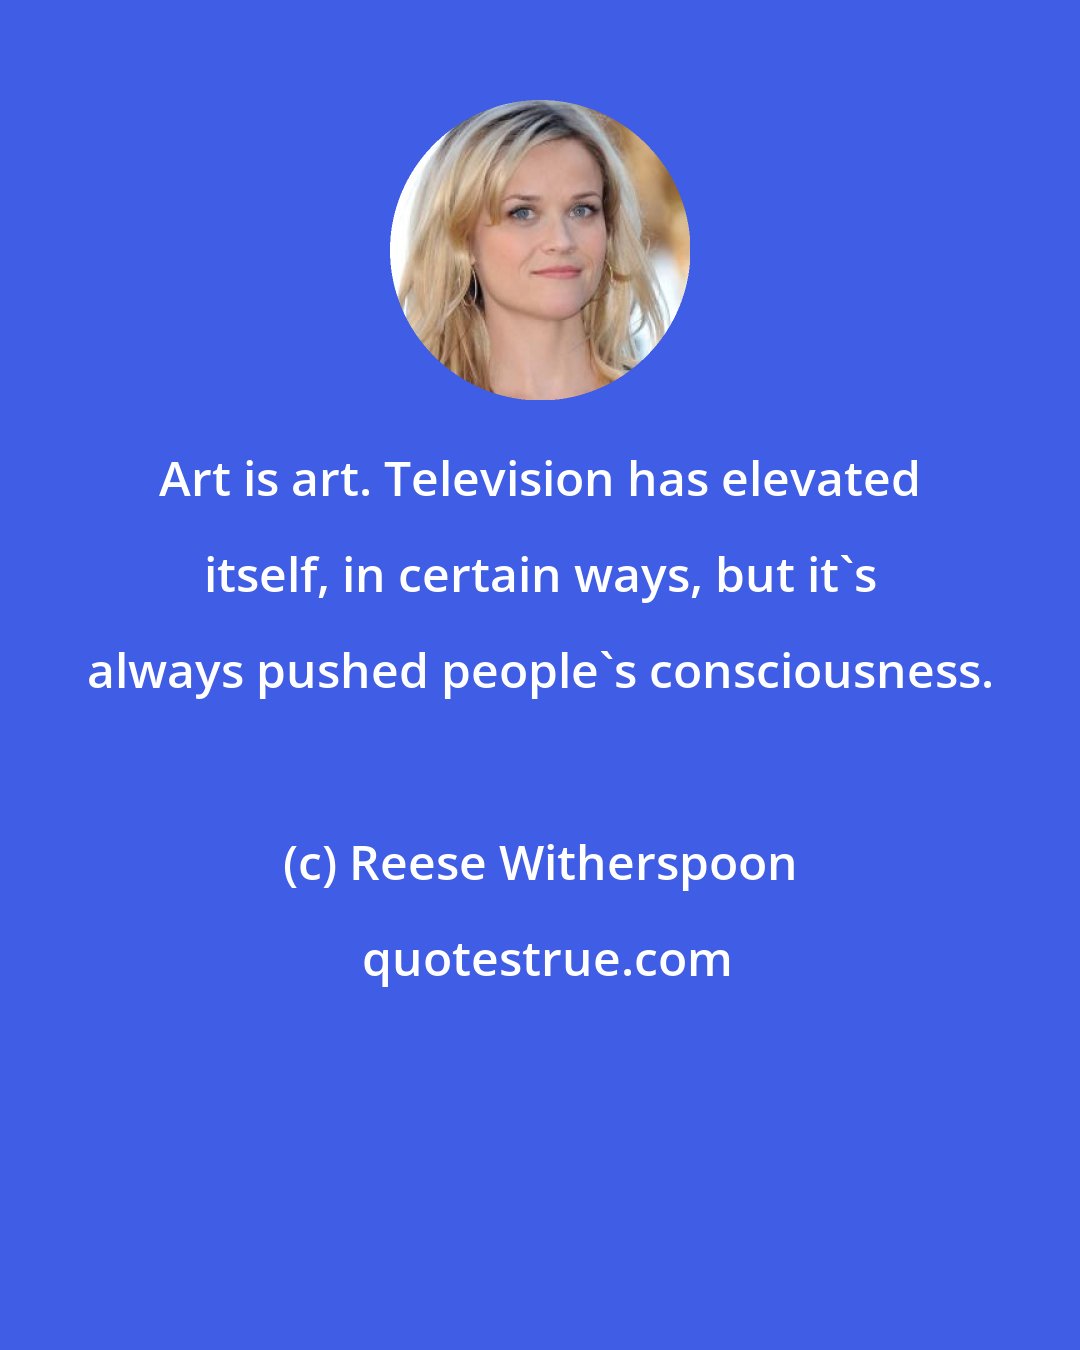 Reese Witherspoon: Art is art. Television has elevated itself, in certain ways, but it's always pushed people's consciousness.